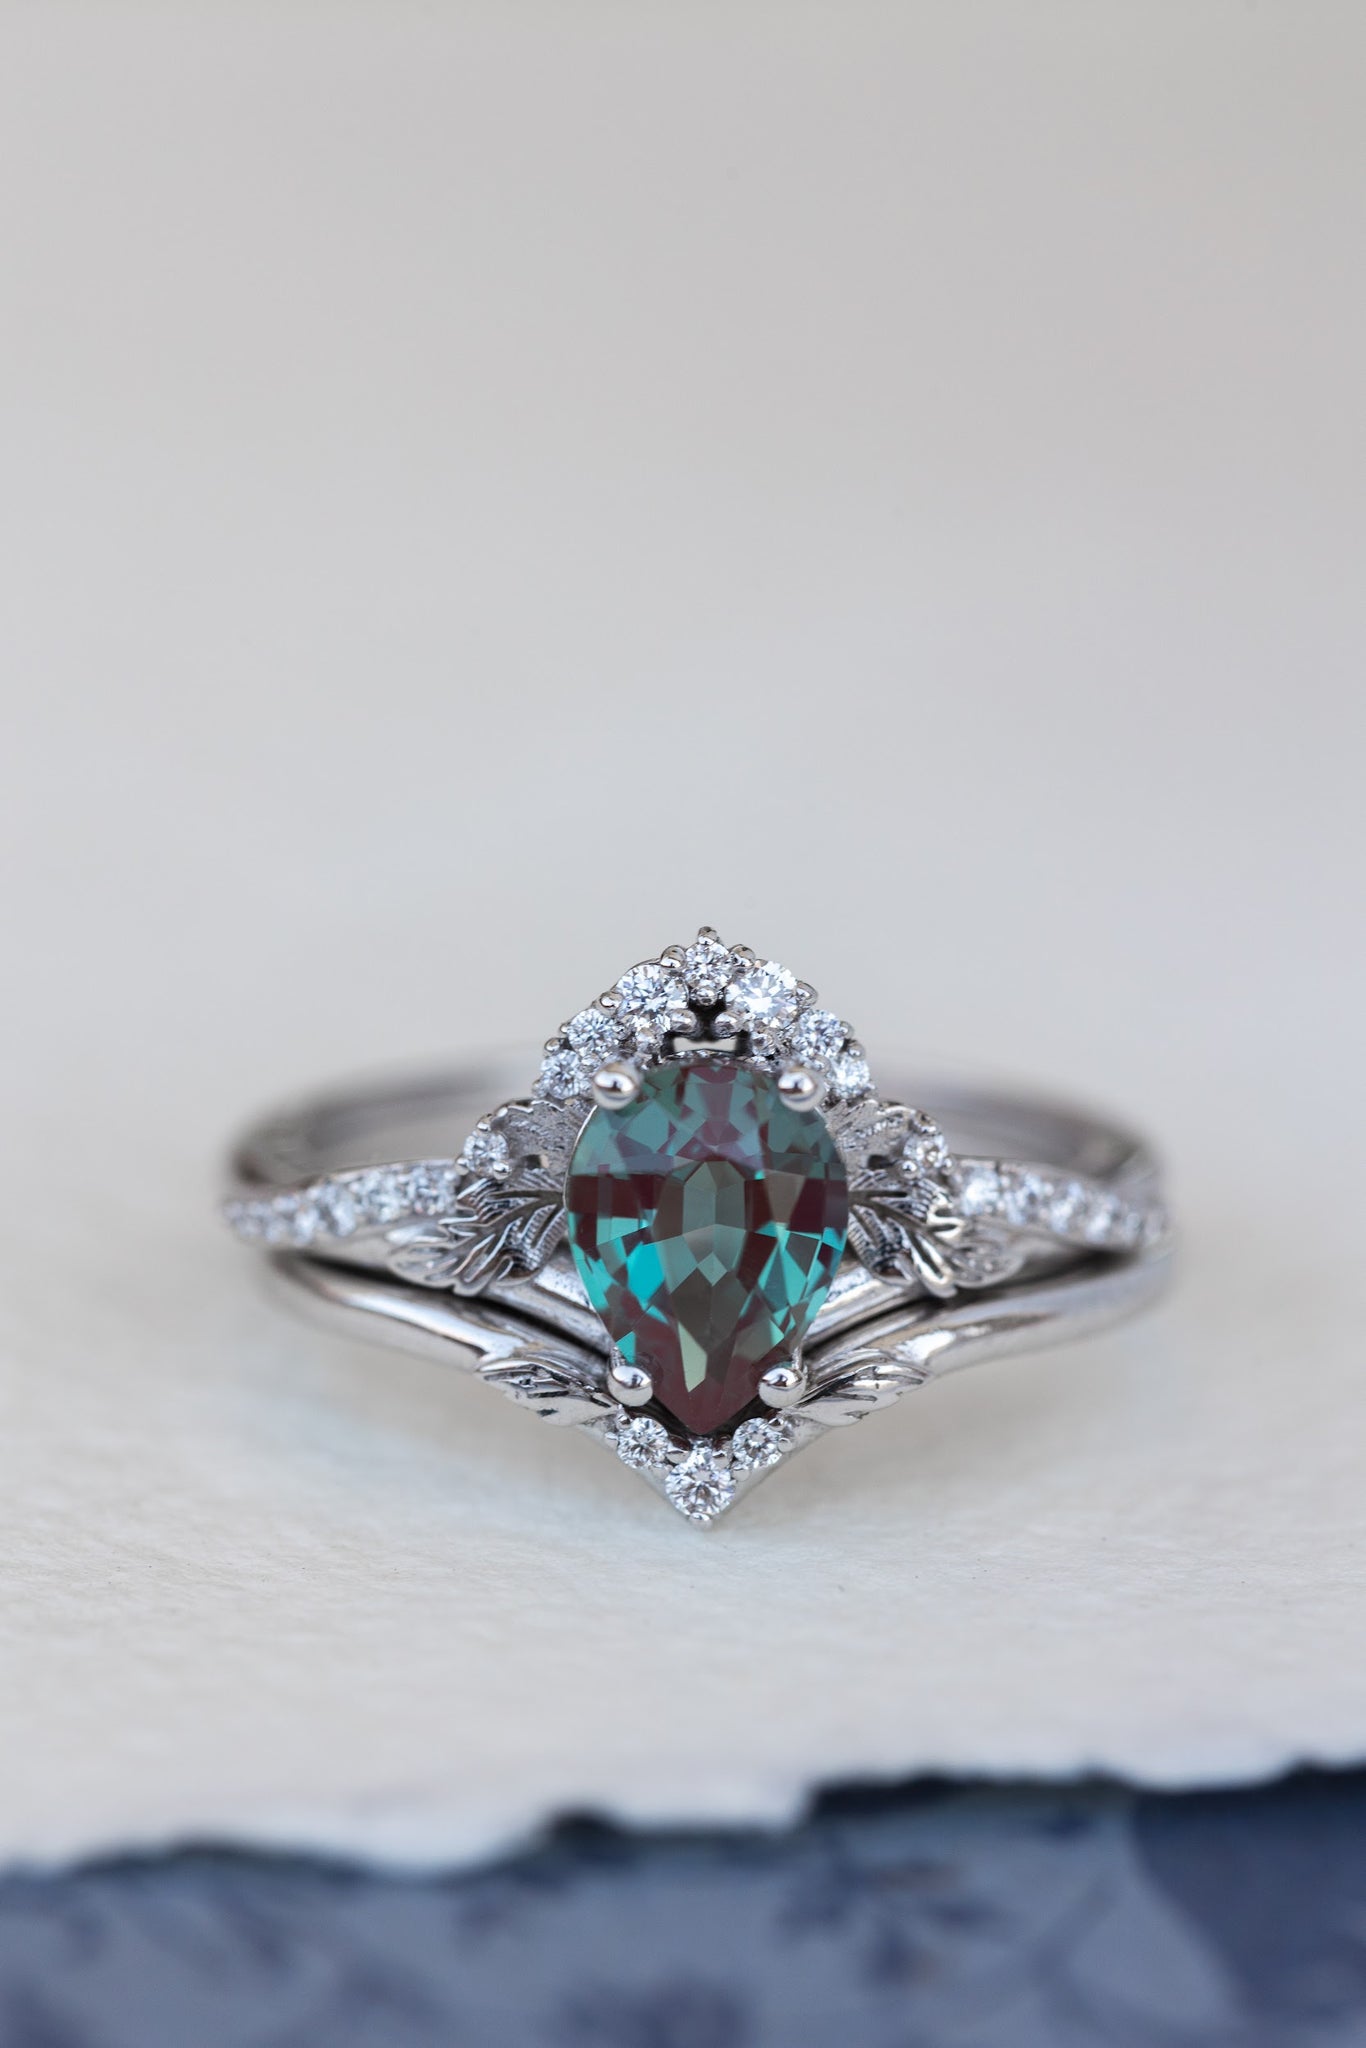 Pear lab alexandrite engagement ring, nature inspired proposal ring with accent diamonds / Amelia - Eden Garden Jewelry™